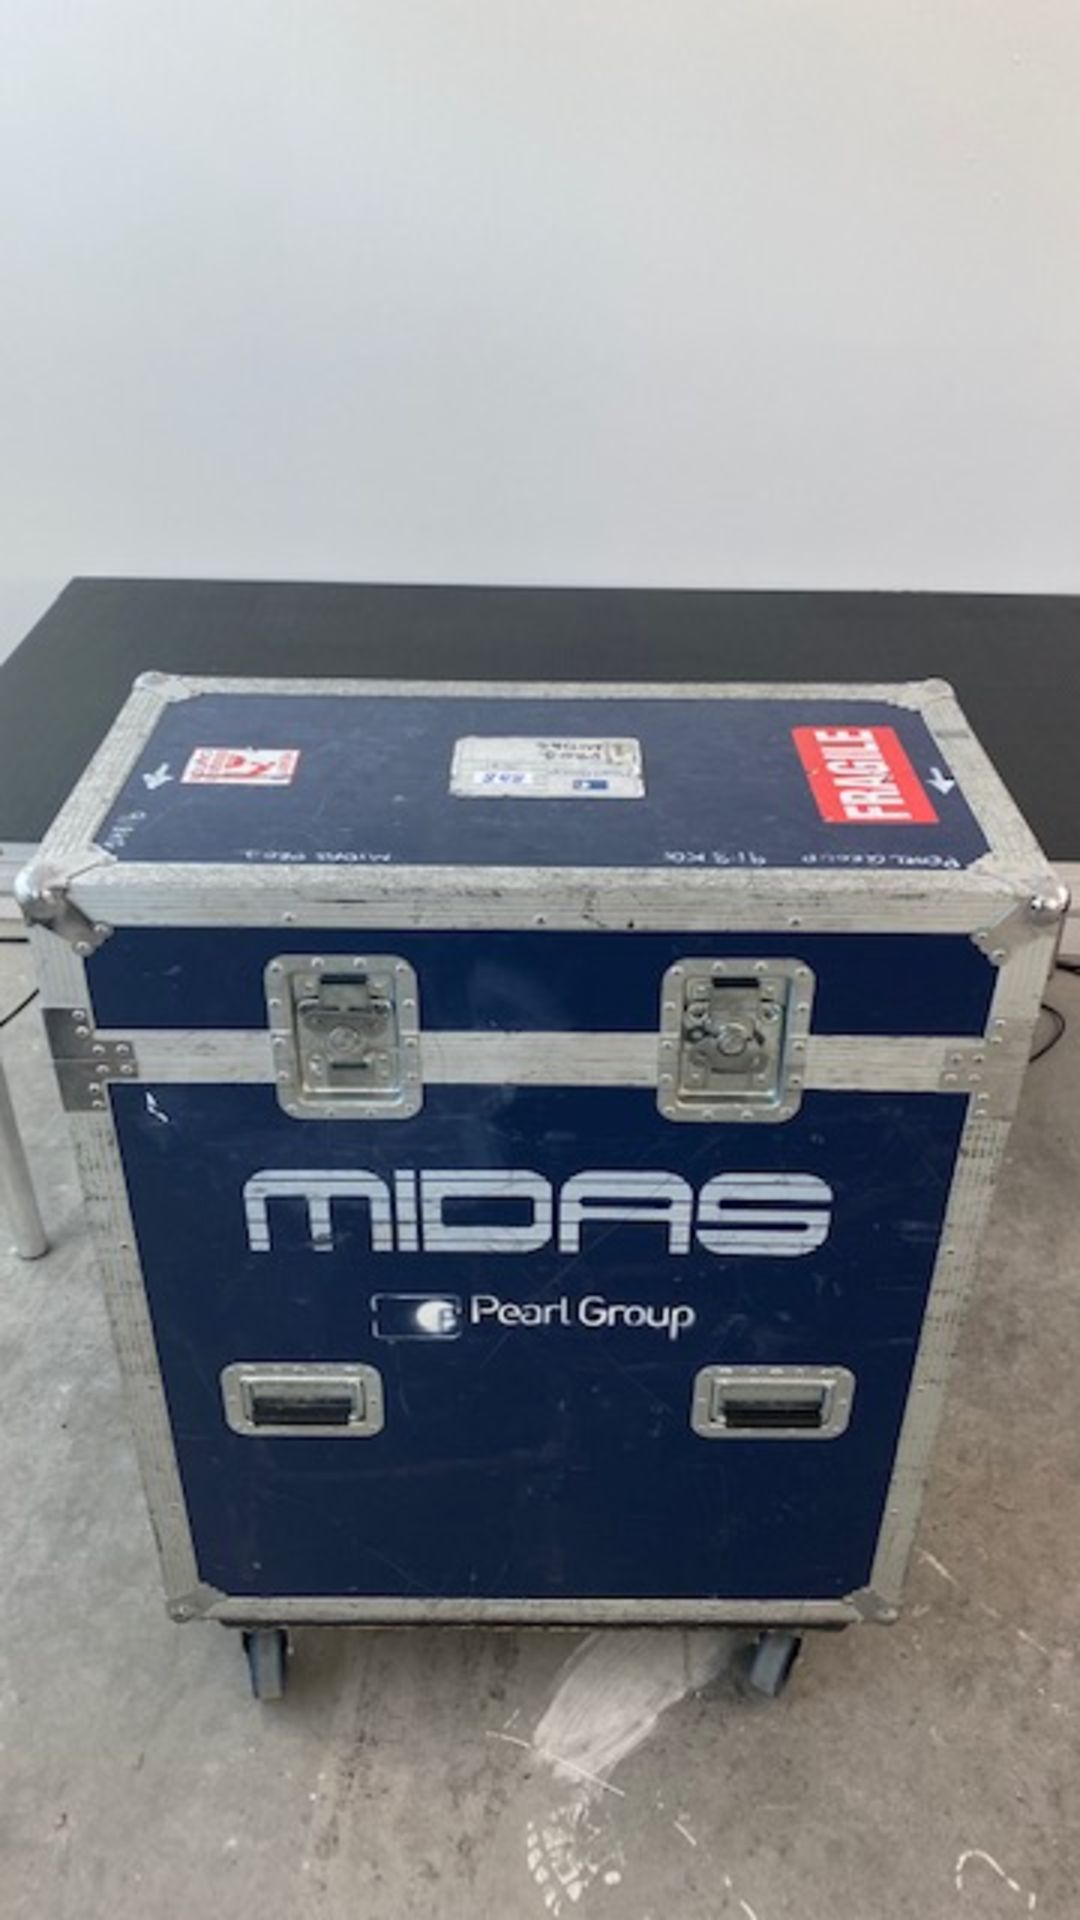 1 x Midas Pro One 24 Channel Digital Mixer Inc Dust Cover In Flight Case - Ref: 888 - CL581 - - Image 3 of 3